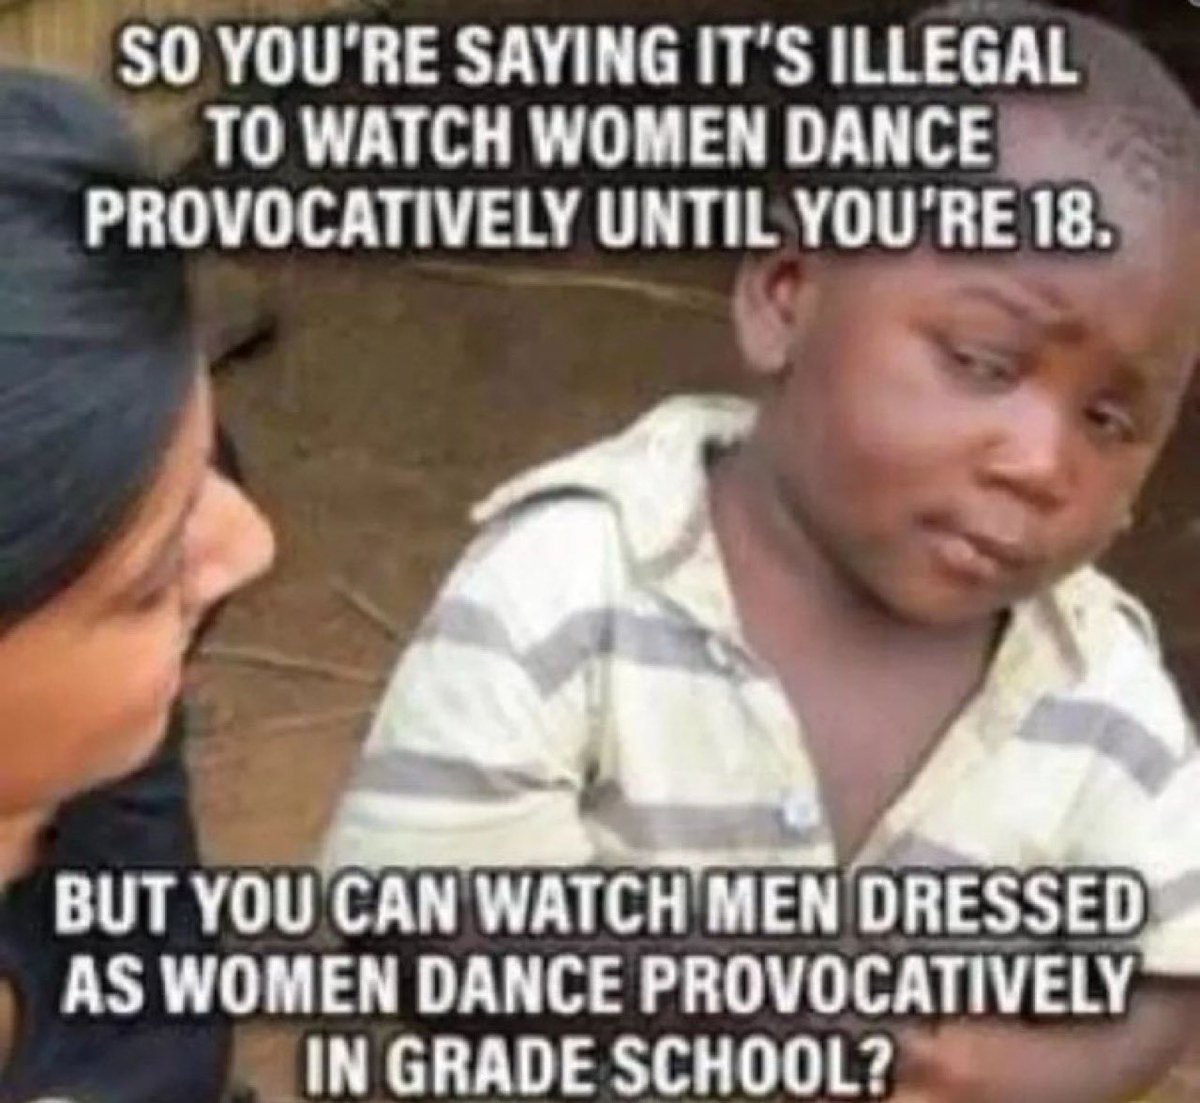 So you're saying it's illegal to watch women dance provocatively until you're 18. But you can watch men dressed as women dance provocatively in grade school? Hell no!